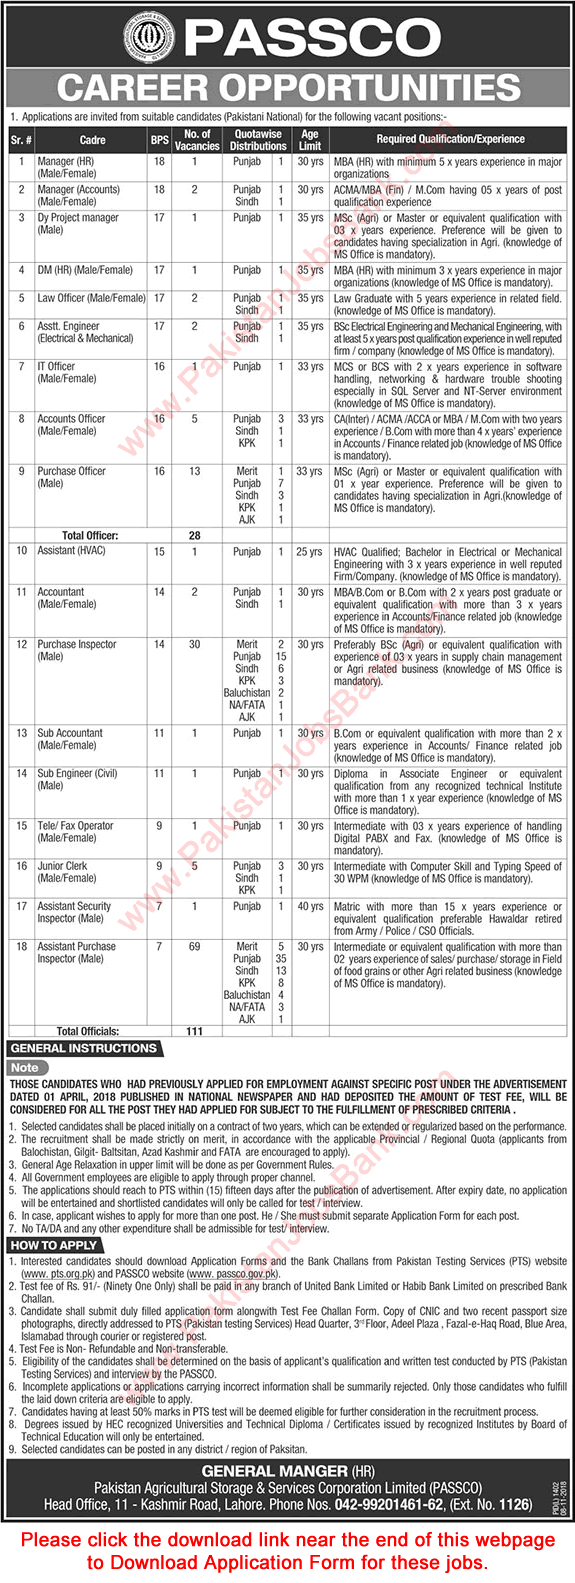 PASSCO Jobs 2018 November PTS Application Form Pakistan Agricultural Storage and Services Corporation Latest